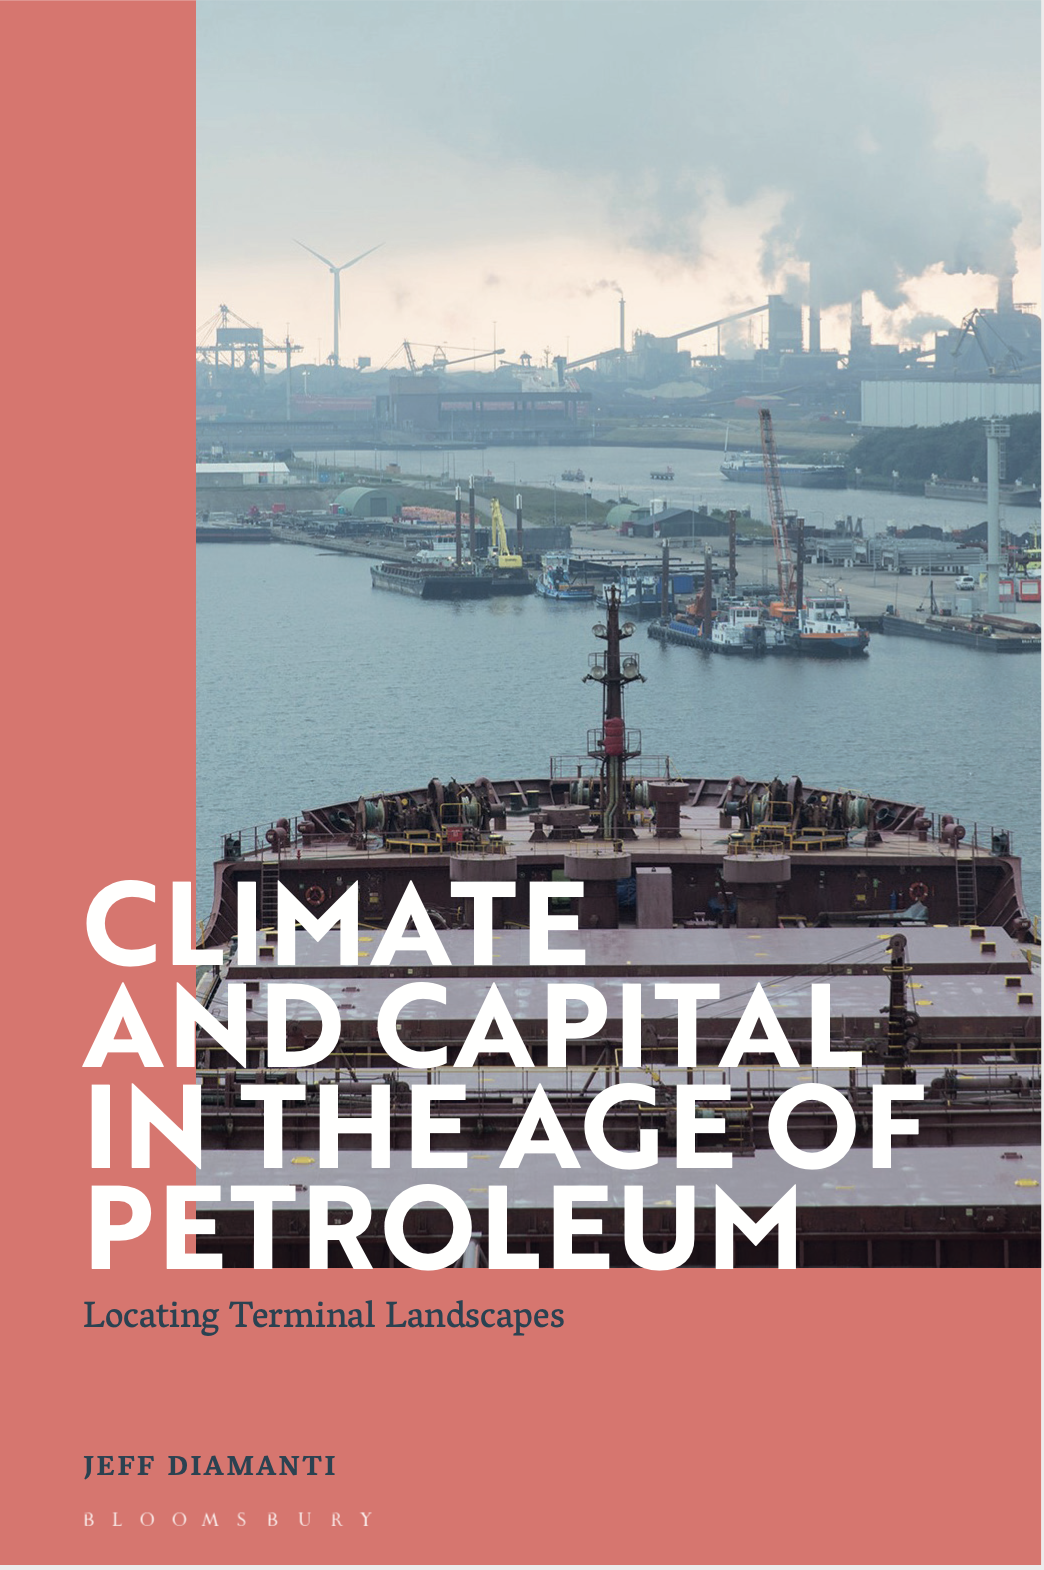 Climate and Capital in the Age of Petroleum: Locating Terminal Landscapes. Bloomsbury (forthcoming)